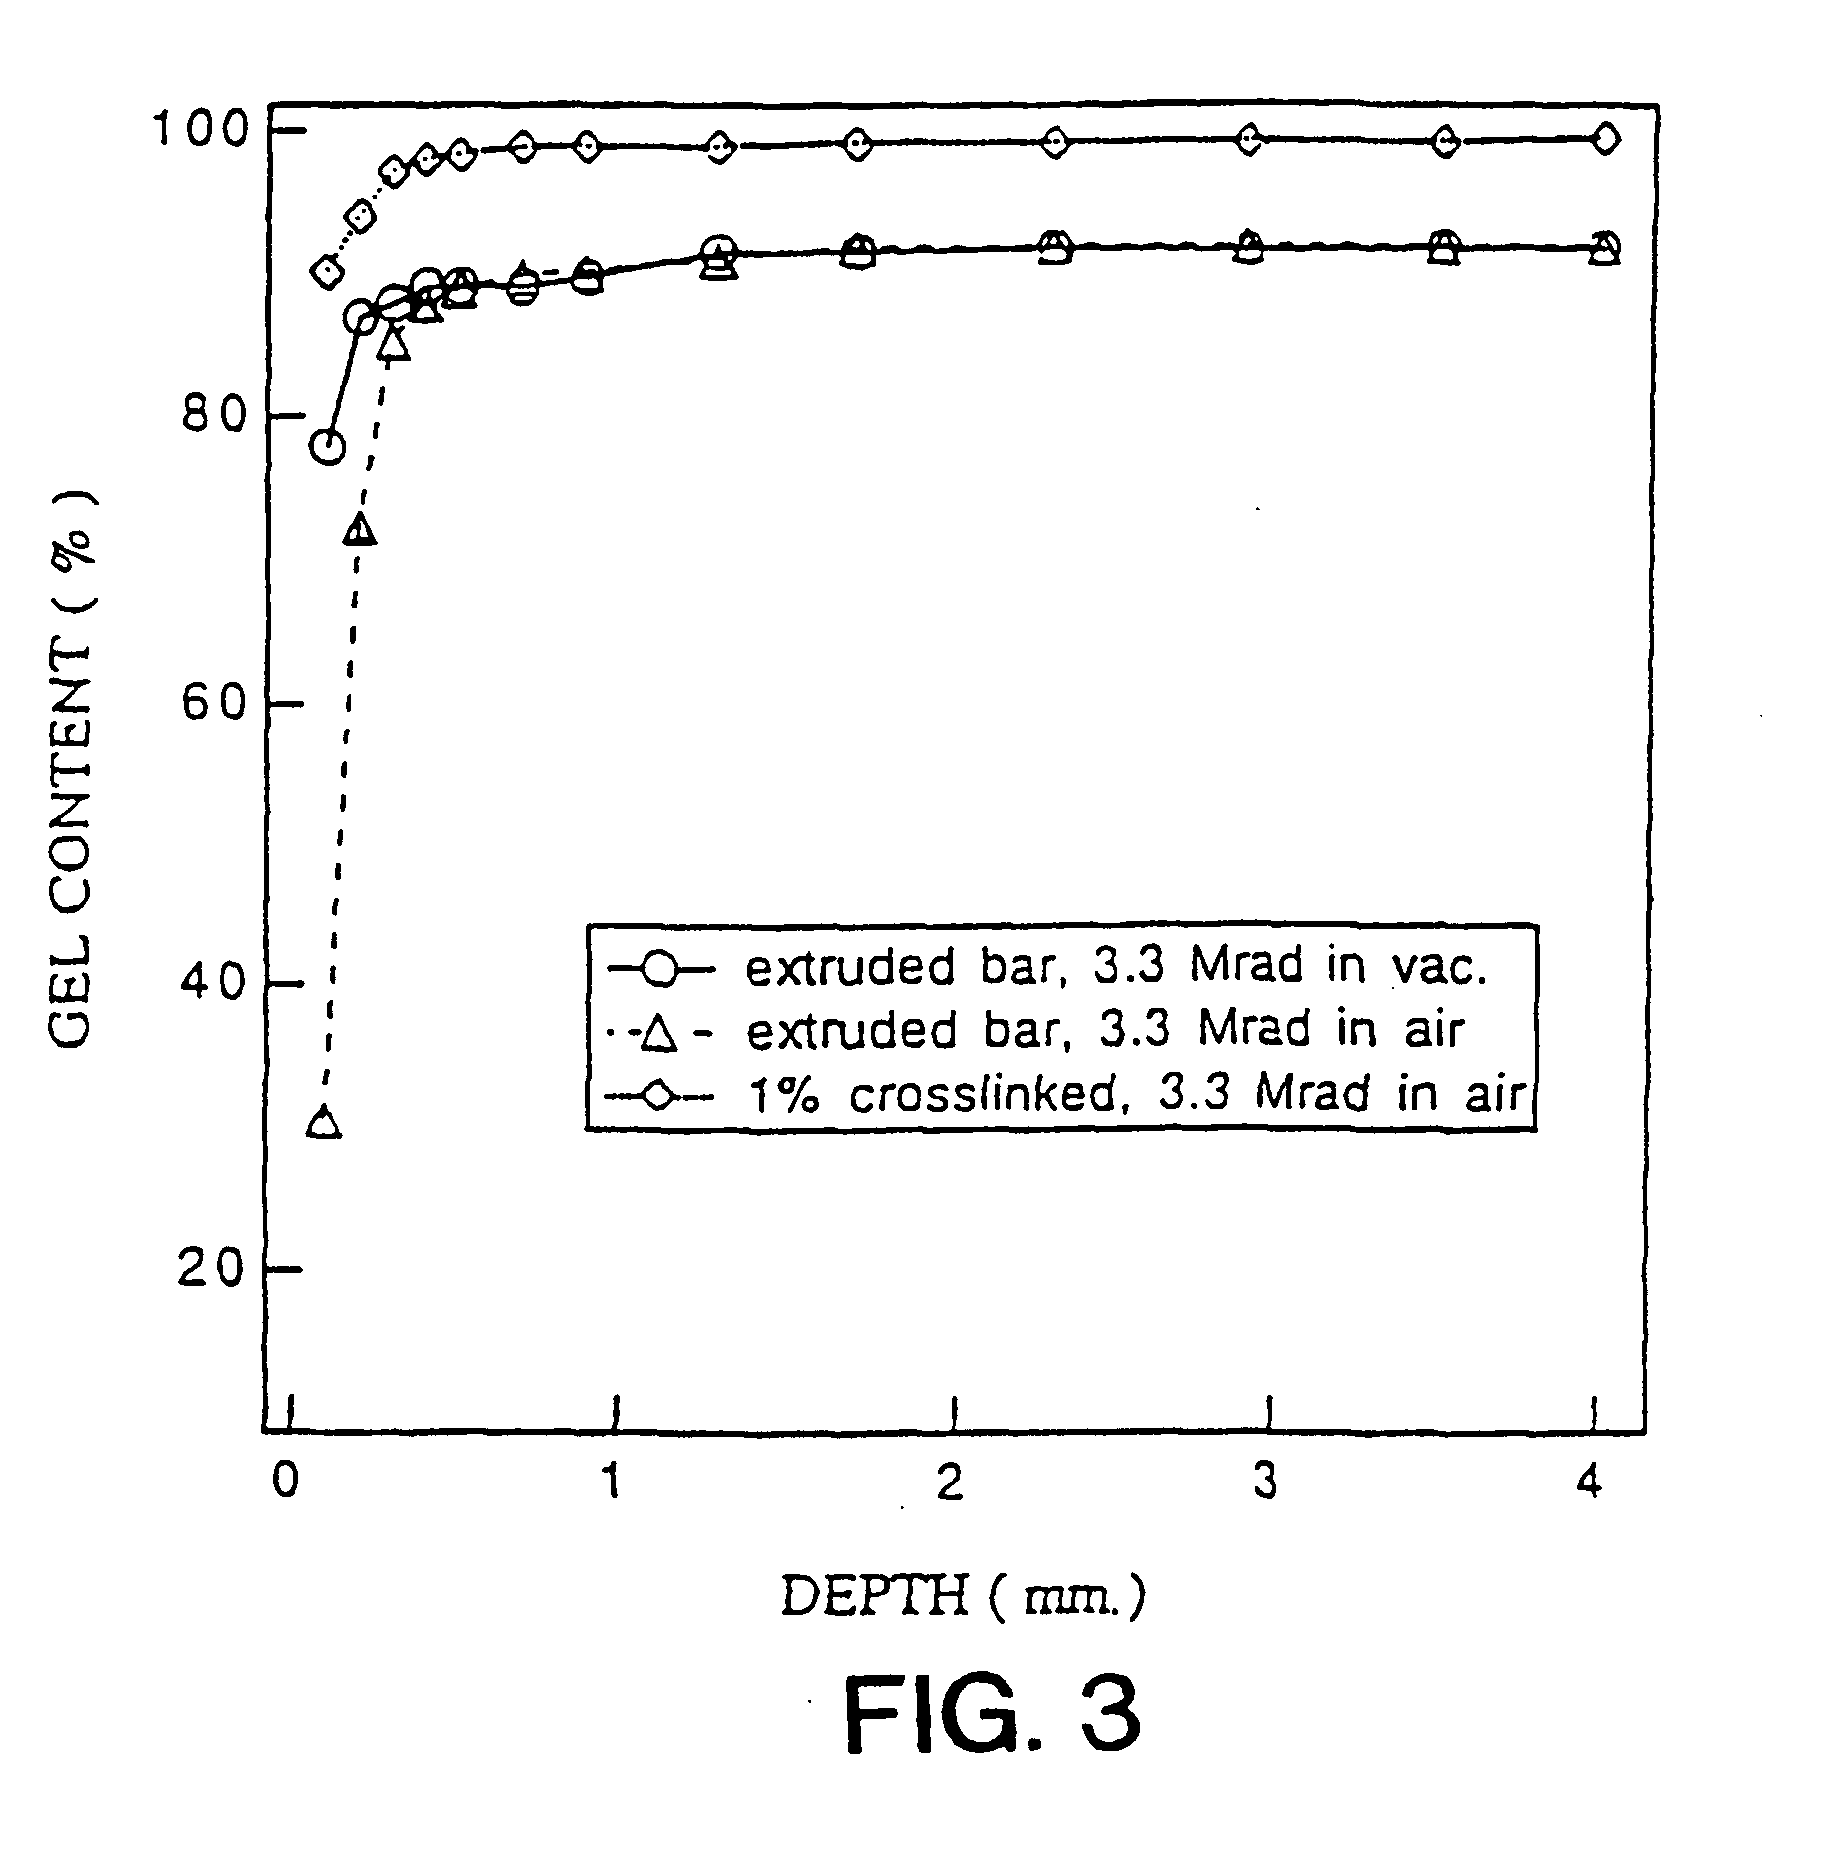 Crosslinking of polyethylene for low wear using radiation and thermal treatments